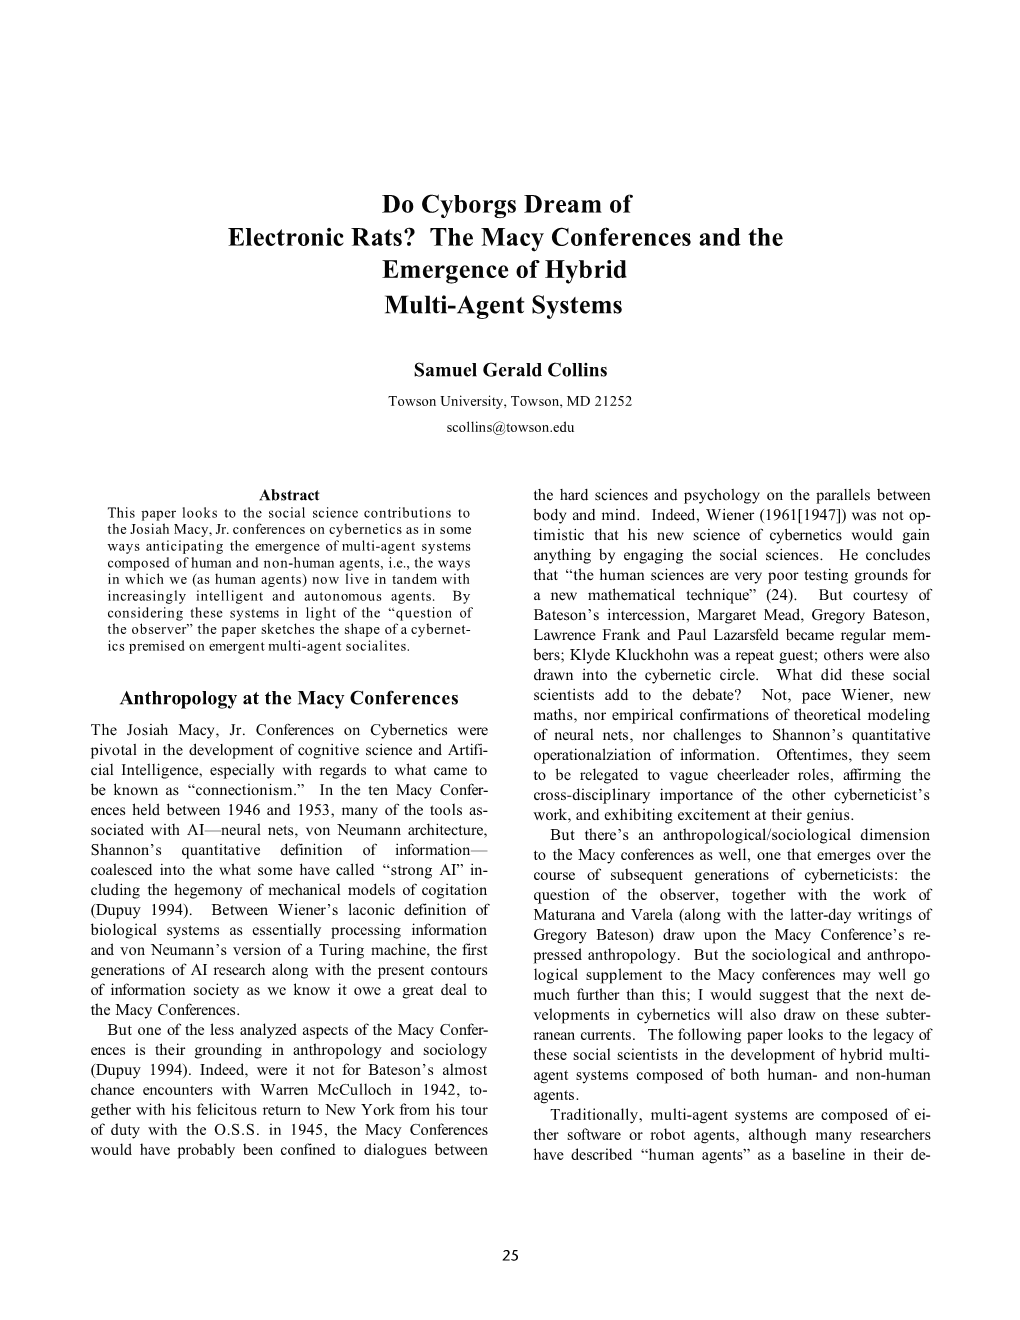 The Macy Conferences and the Emergence of Hybrid Multi-Agent Systems